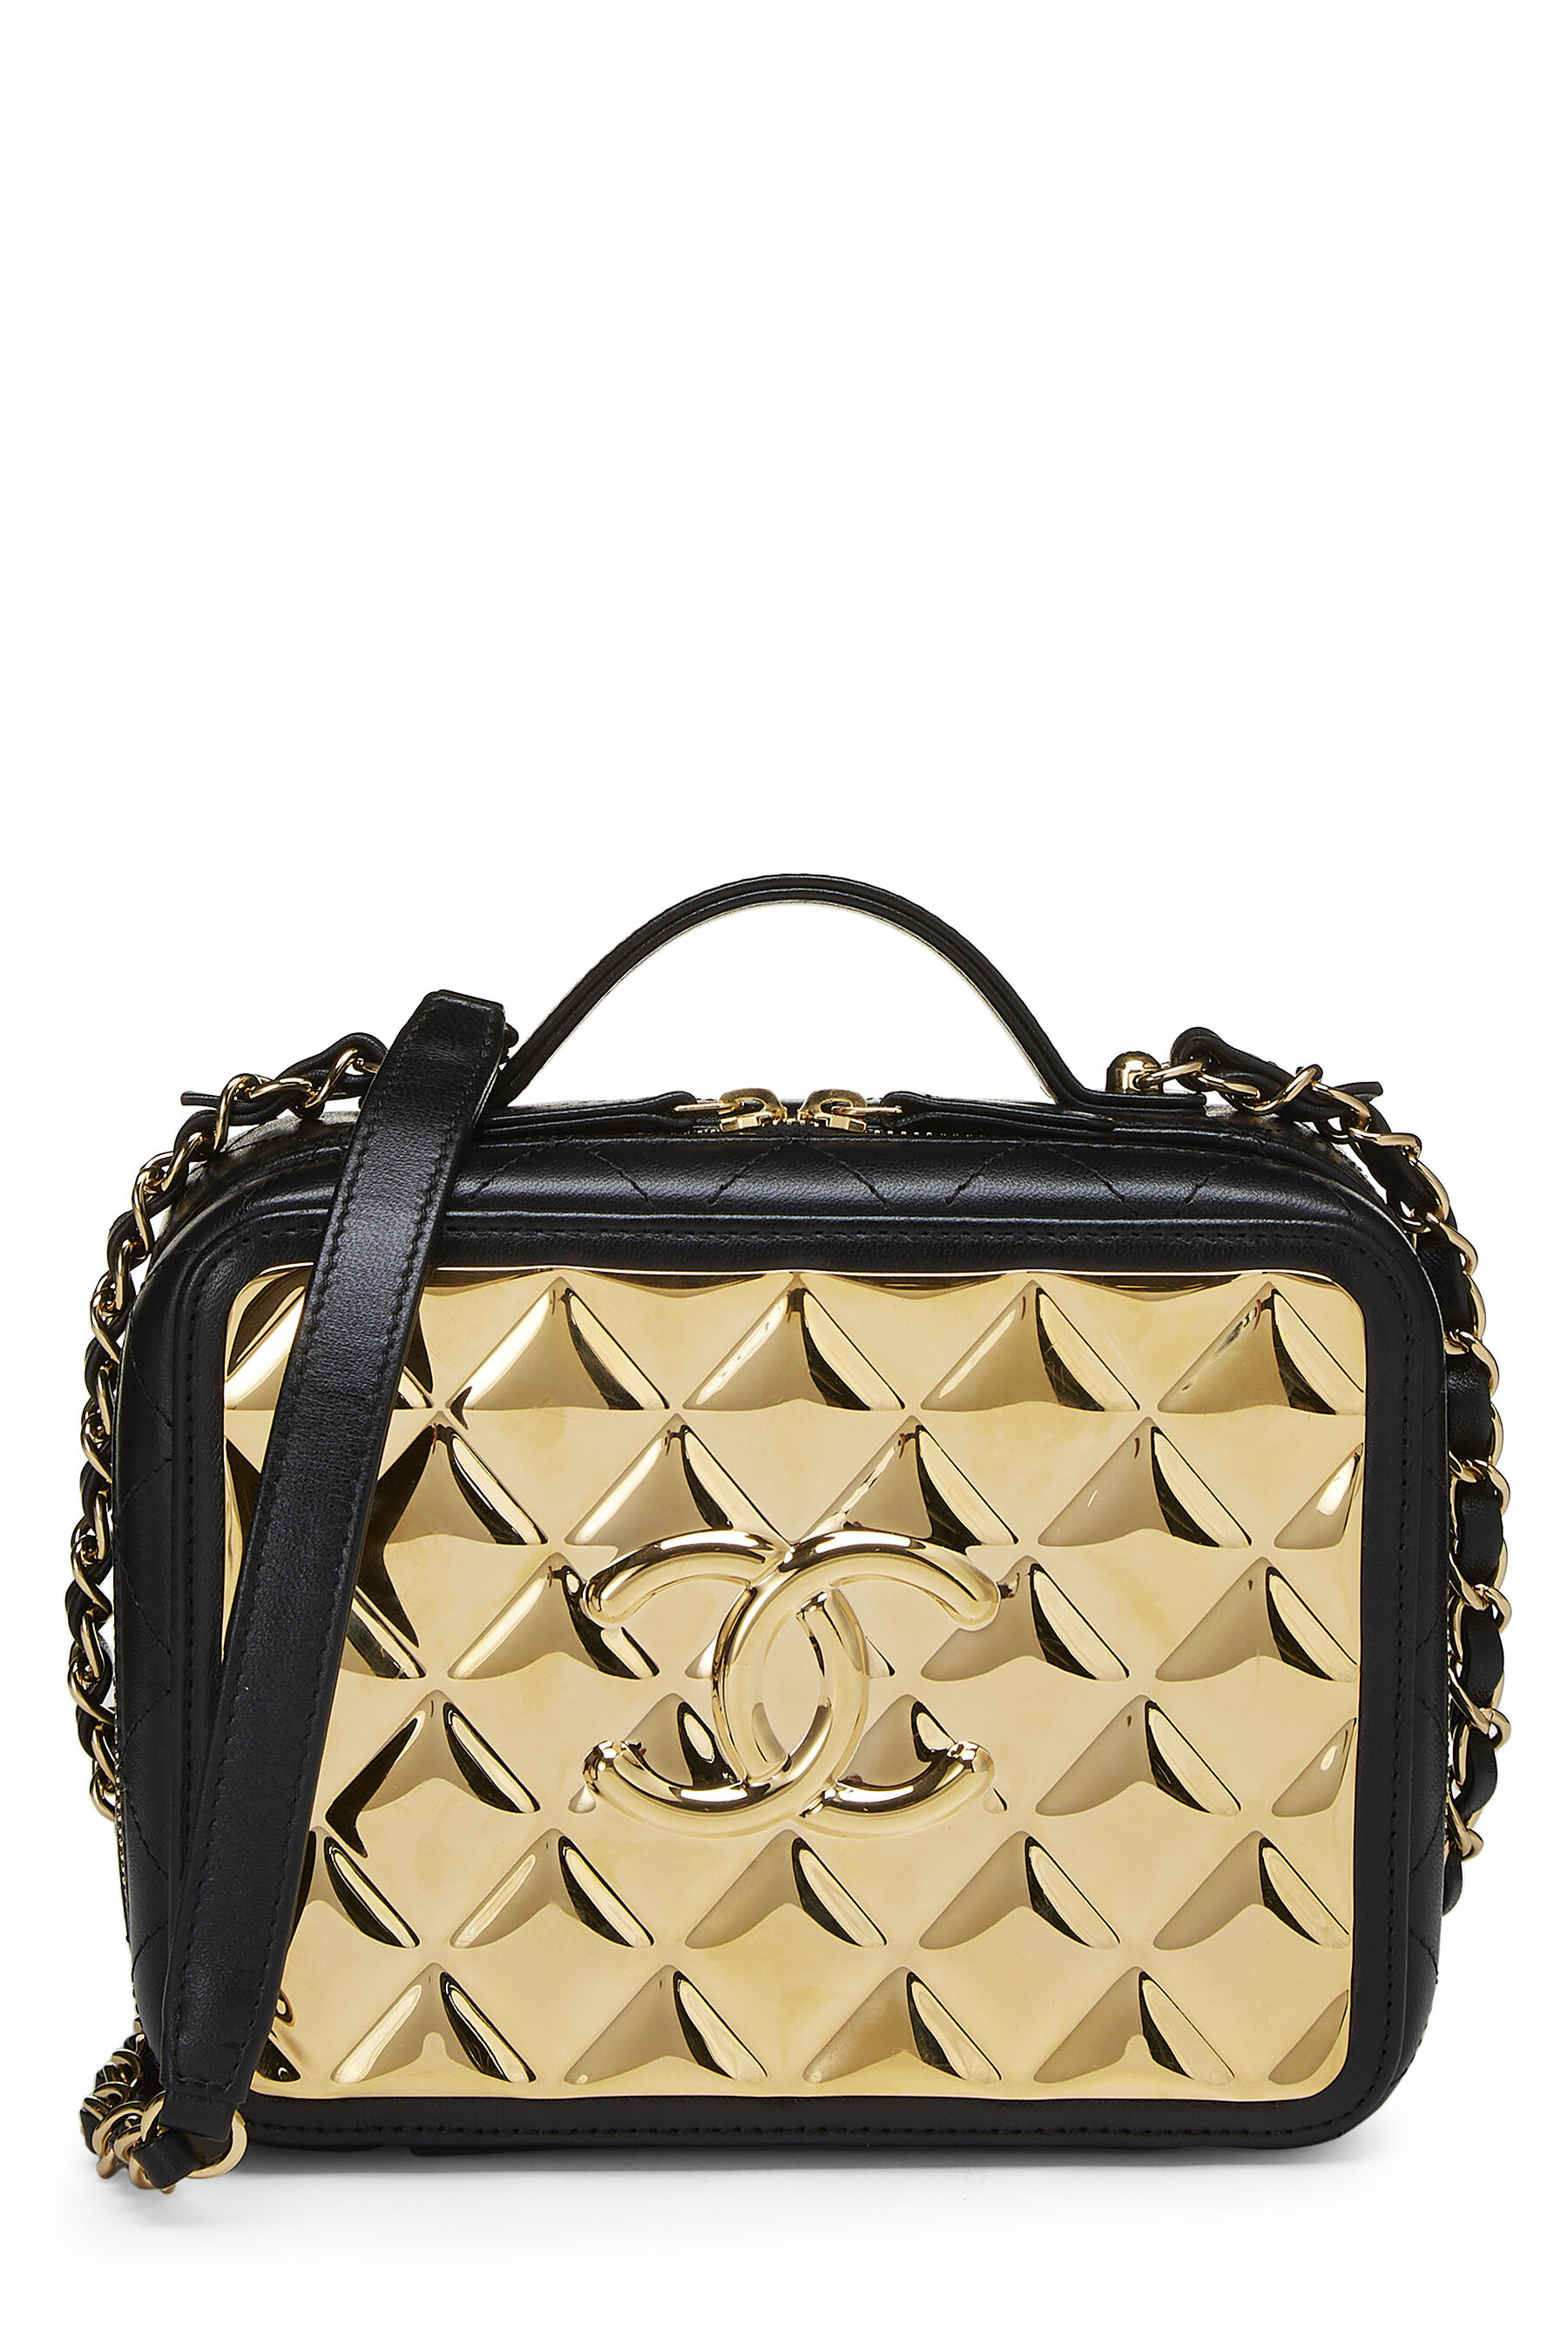 Chanel - Black & Gold Quilted Lambskin Golden Plate Vanity